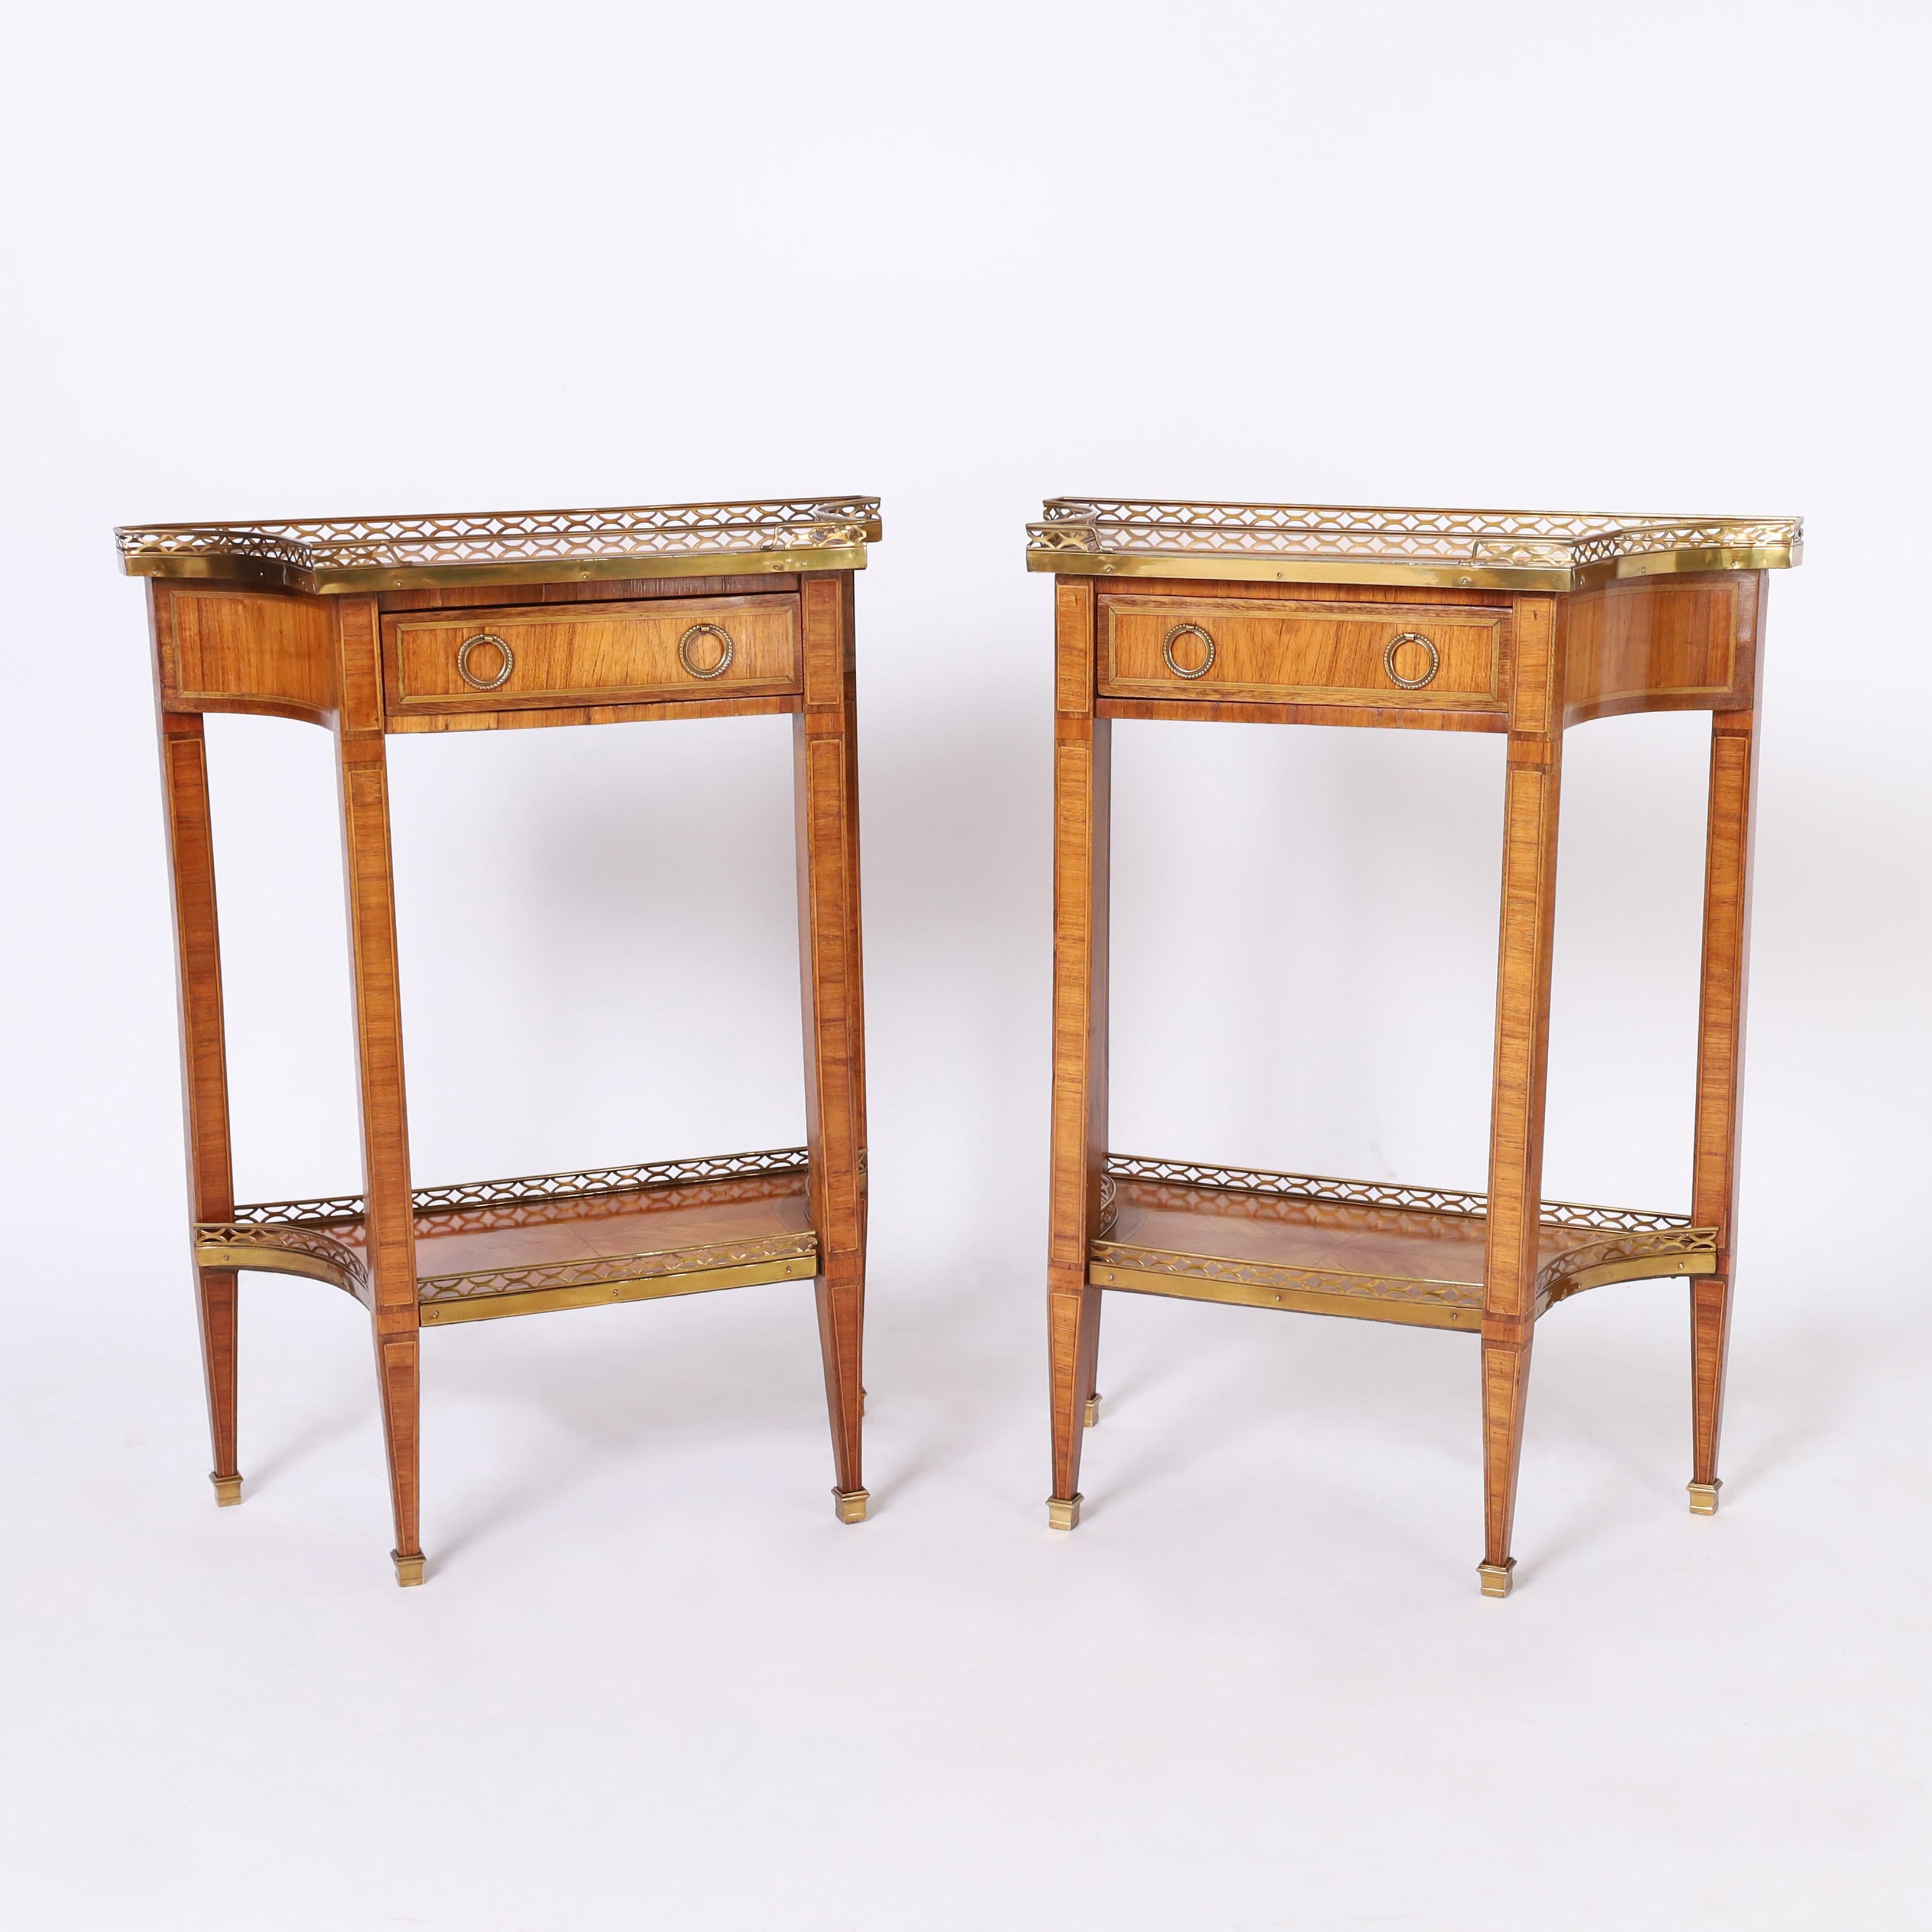 Standout pair of antique two tiered French stands crafted in satinwood in an unusual form with concave sides featuring marble tops, brass galleries, crossbanded inlays and tapered legs with brass spade feet.